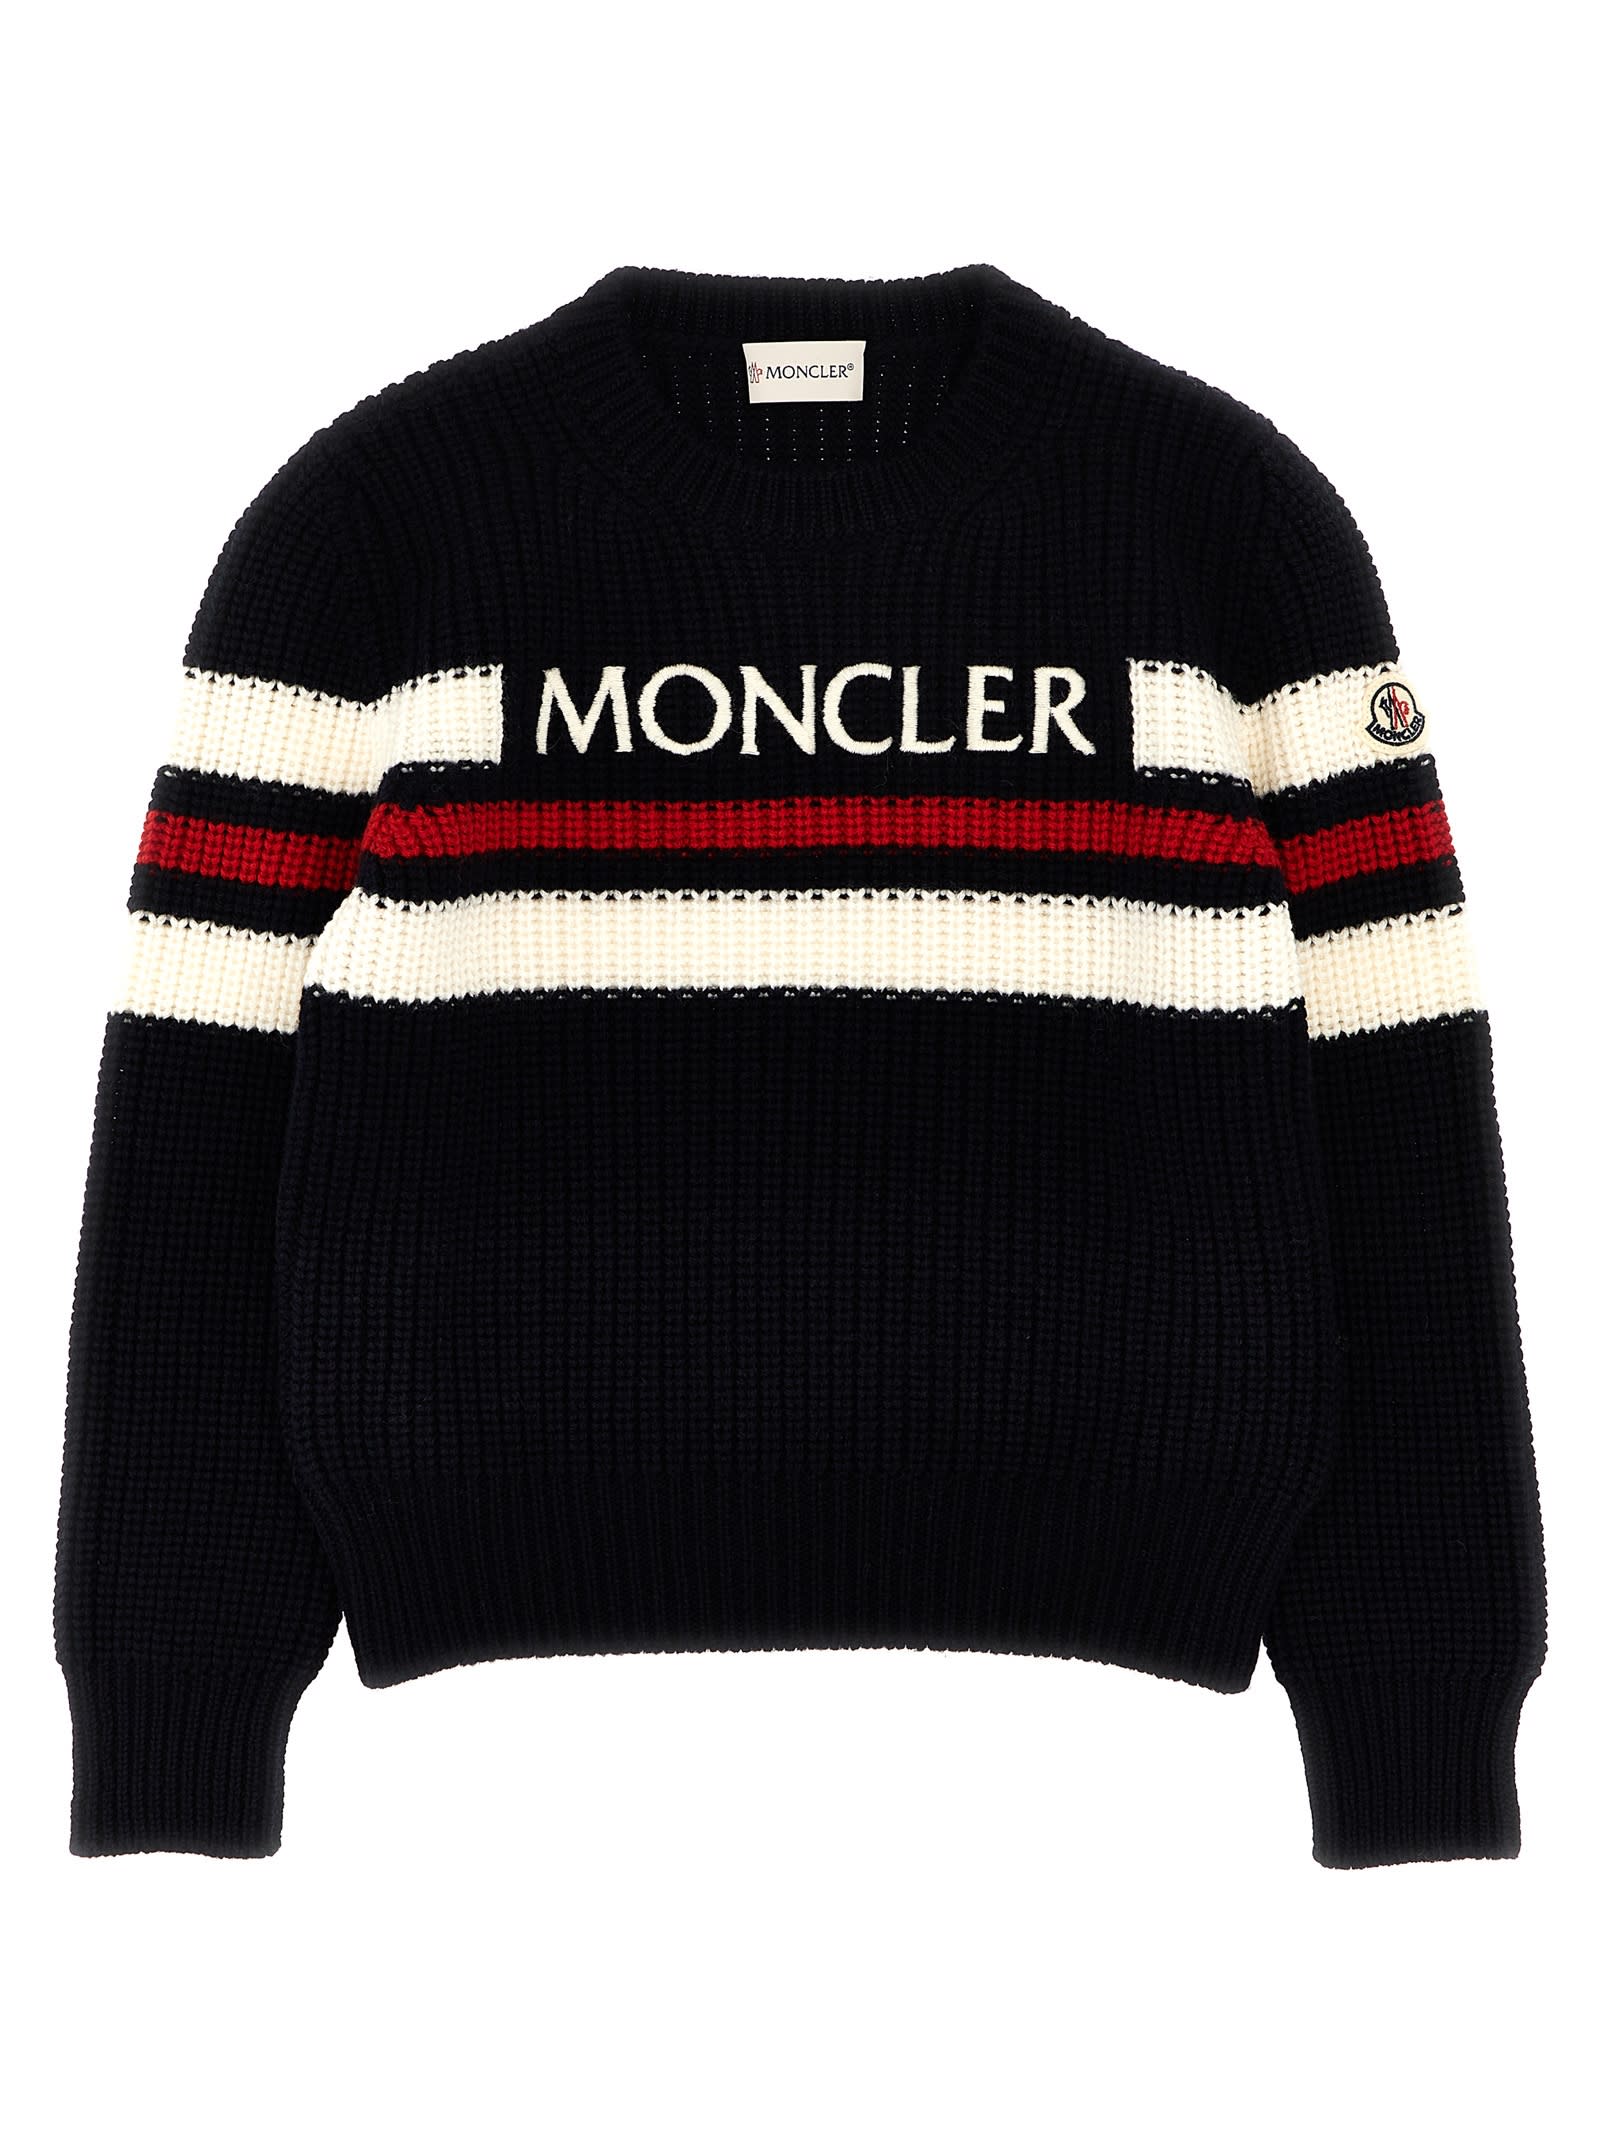 MONCLER LOGO EMBROIDERY SWEATER